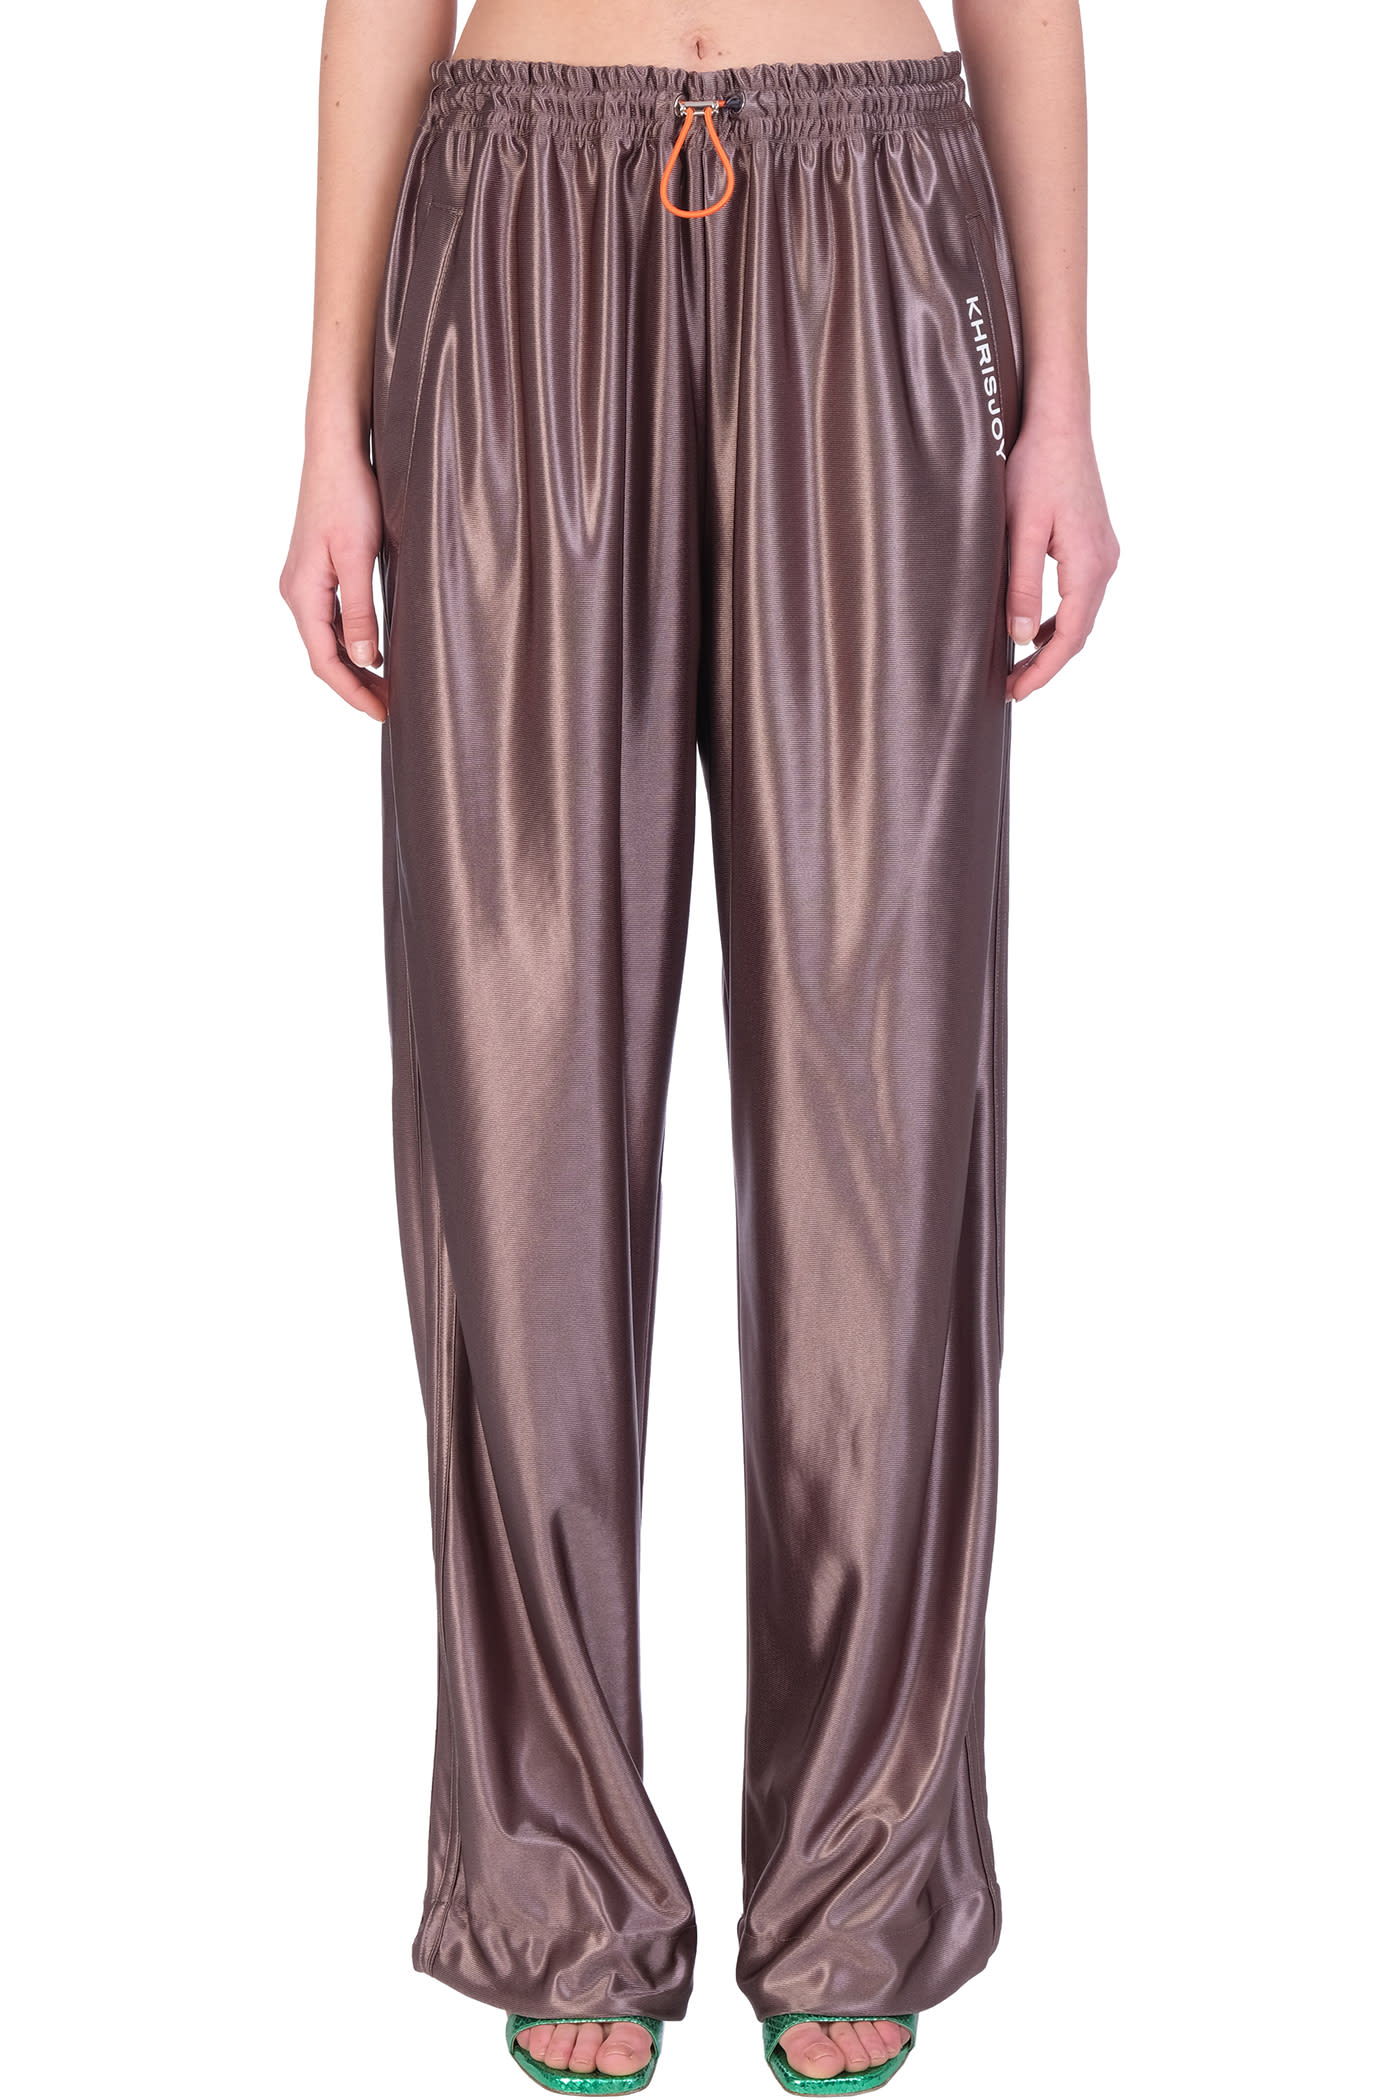 Khrisjoy Pants In Taupe Polyester